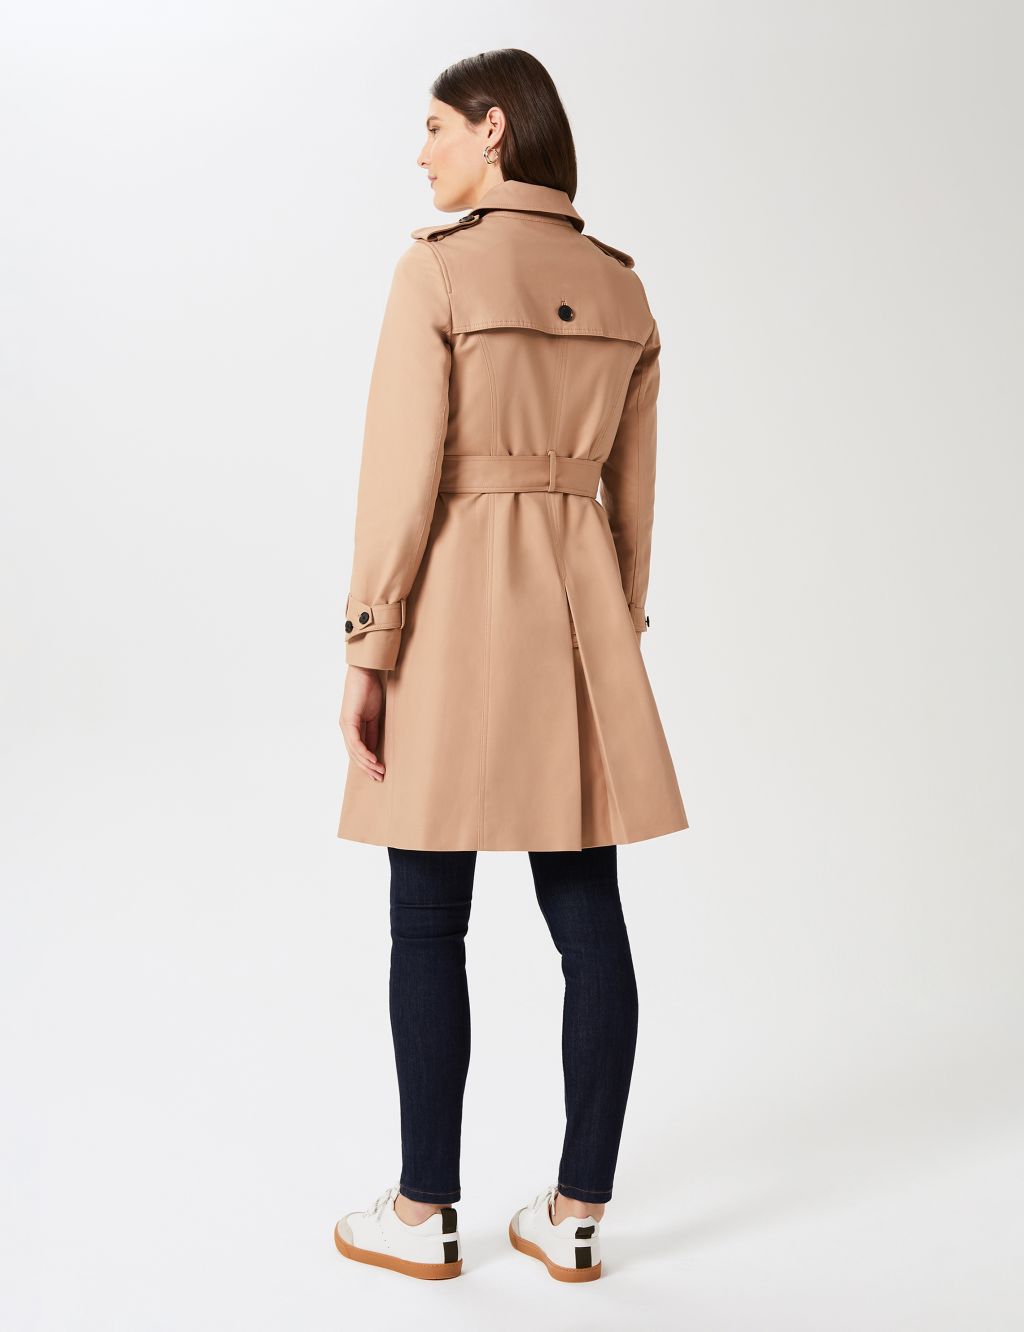 Saskia Water Resistant Belted Trench Coat image 4